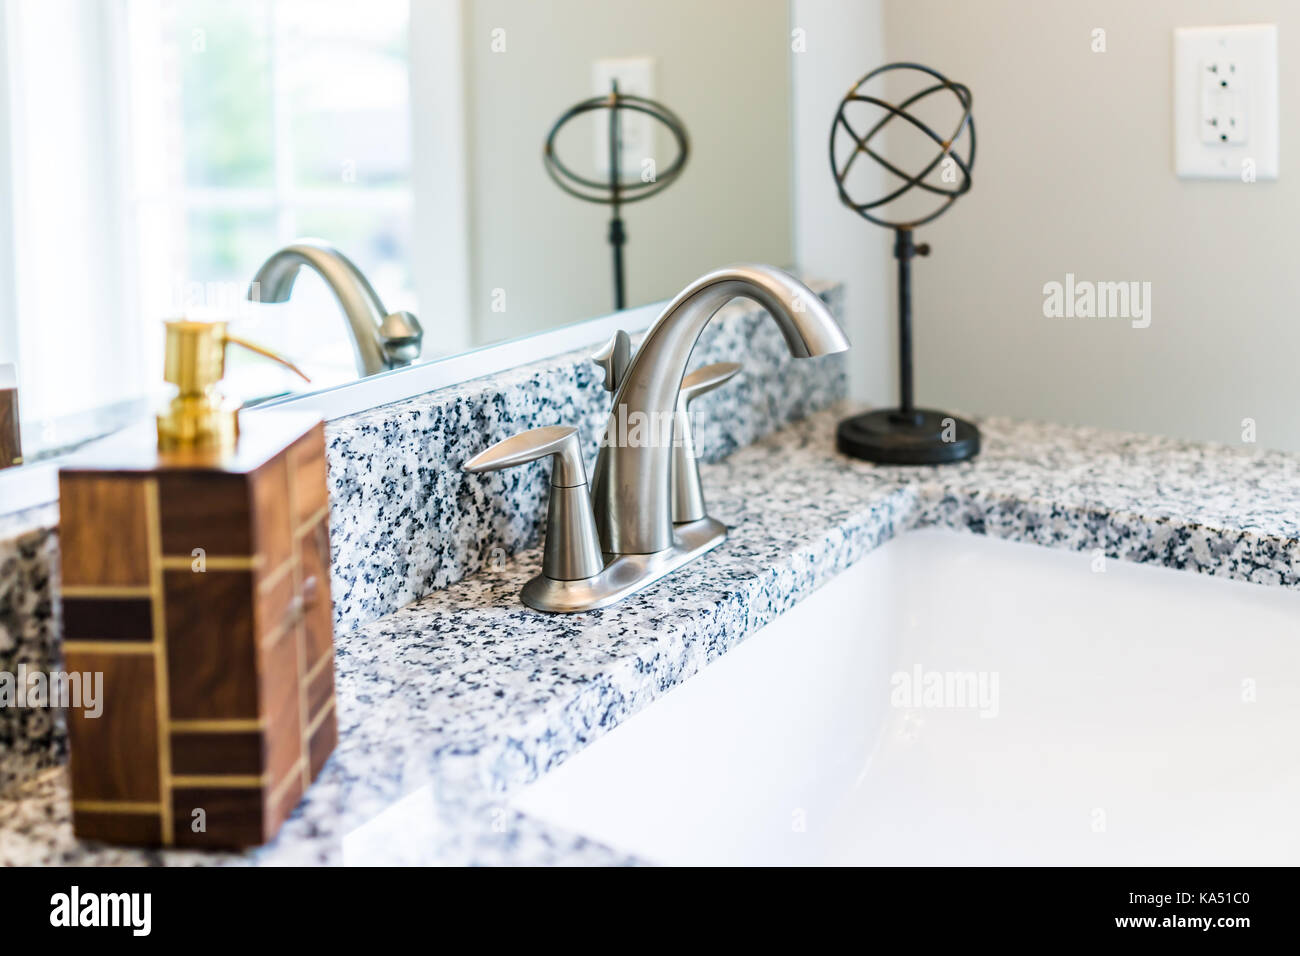 Closeup Of Modern Bathroom Sink With Granite Countertop Mirror Soap Dispenser Pump And Faucet In Staging Model Home Apartment Or House Stock Photo Alamy